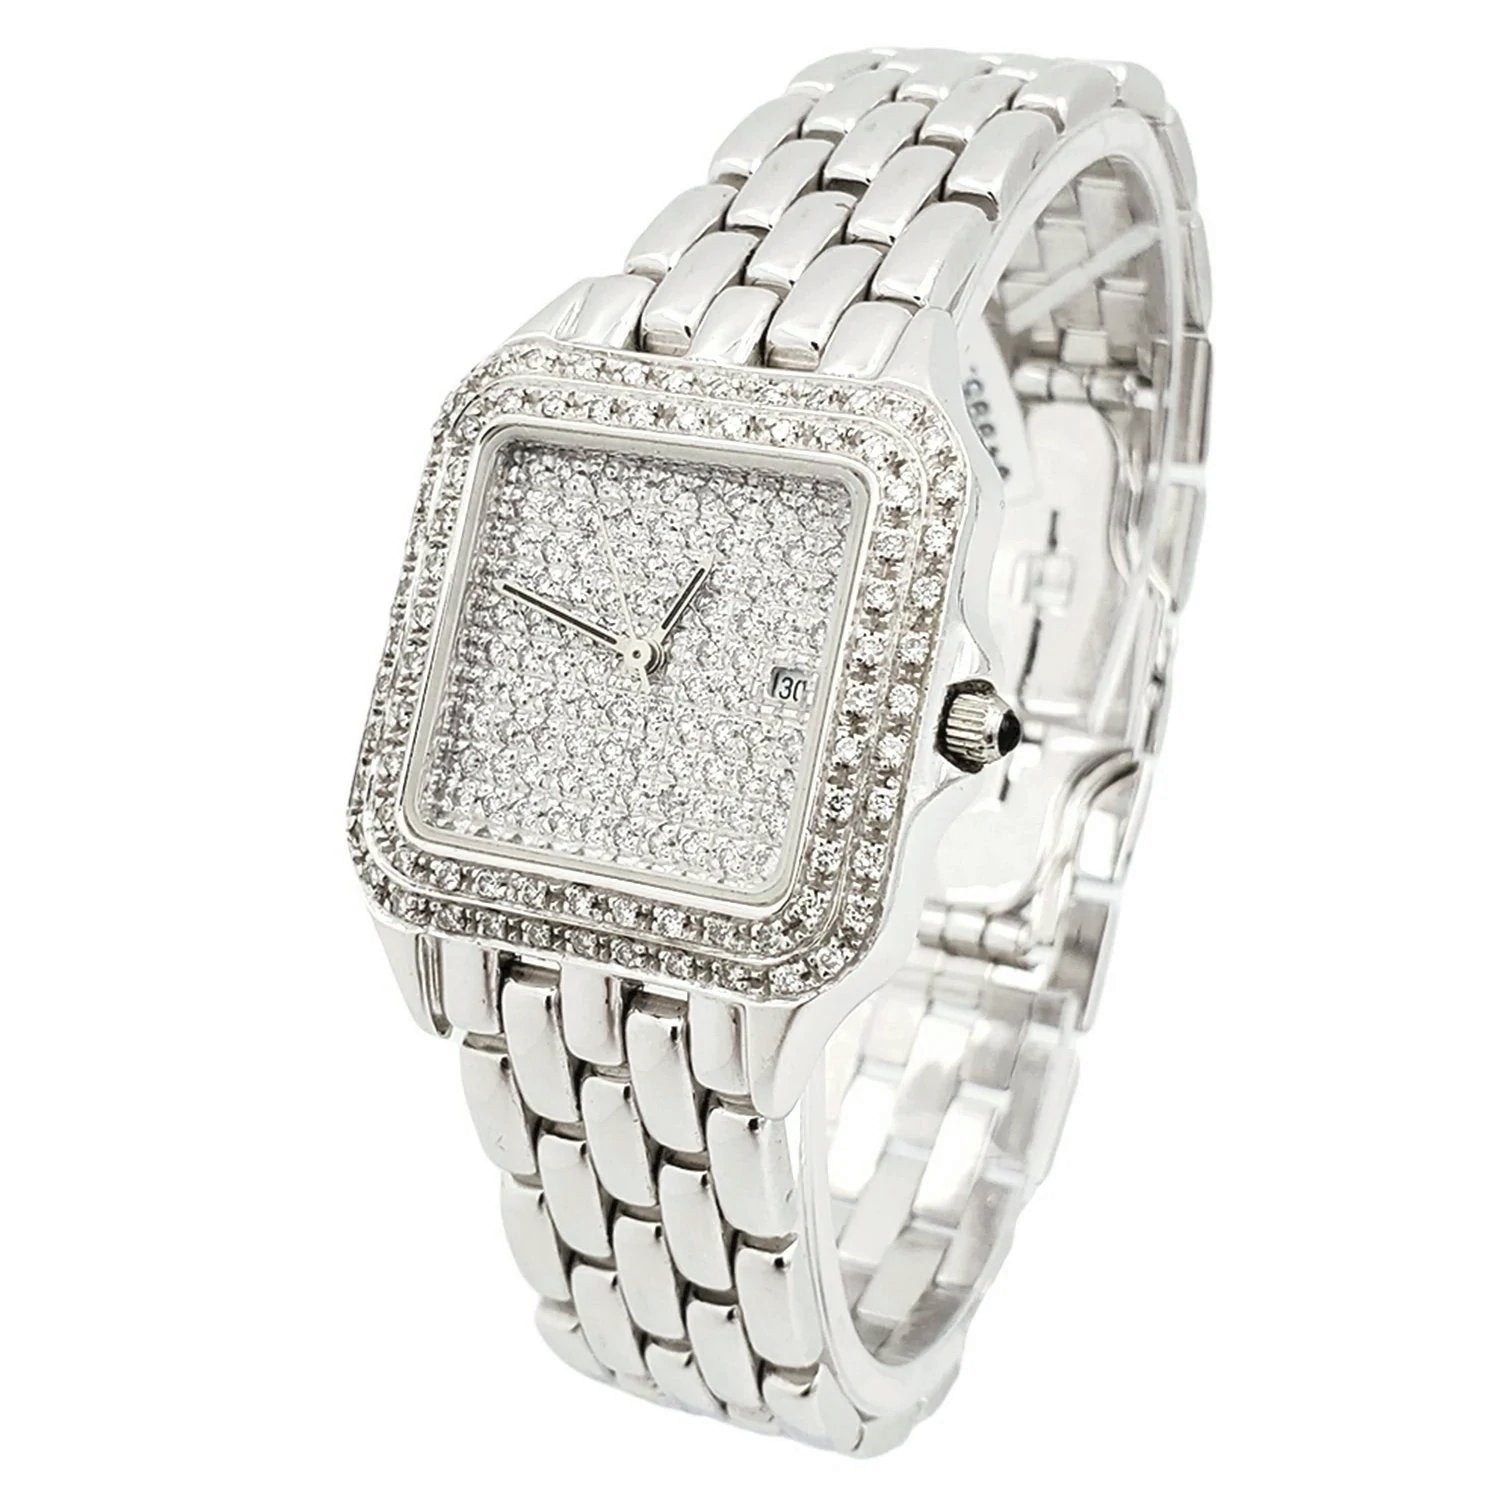 Unisex Geneve 14K White Gold Watch with Diamond Dial and Diamond Bezel. (Pre-Owned)